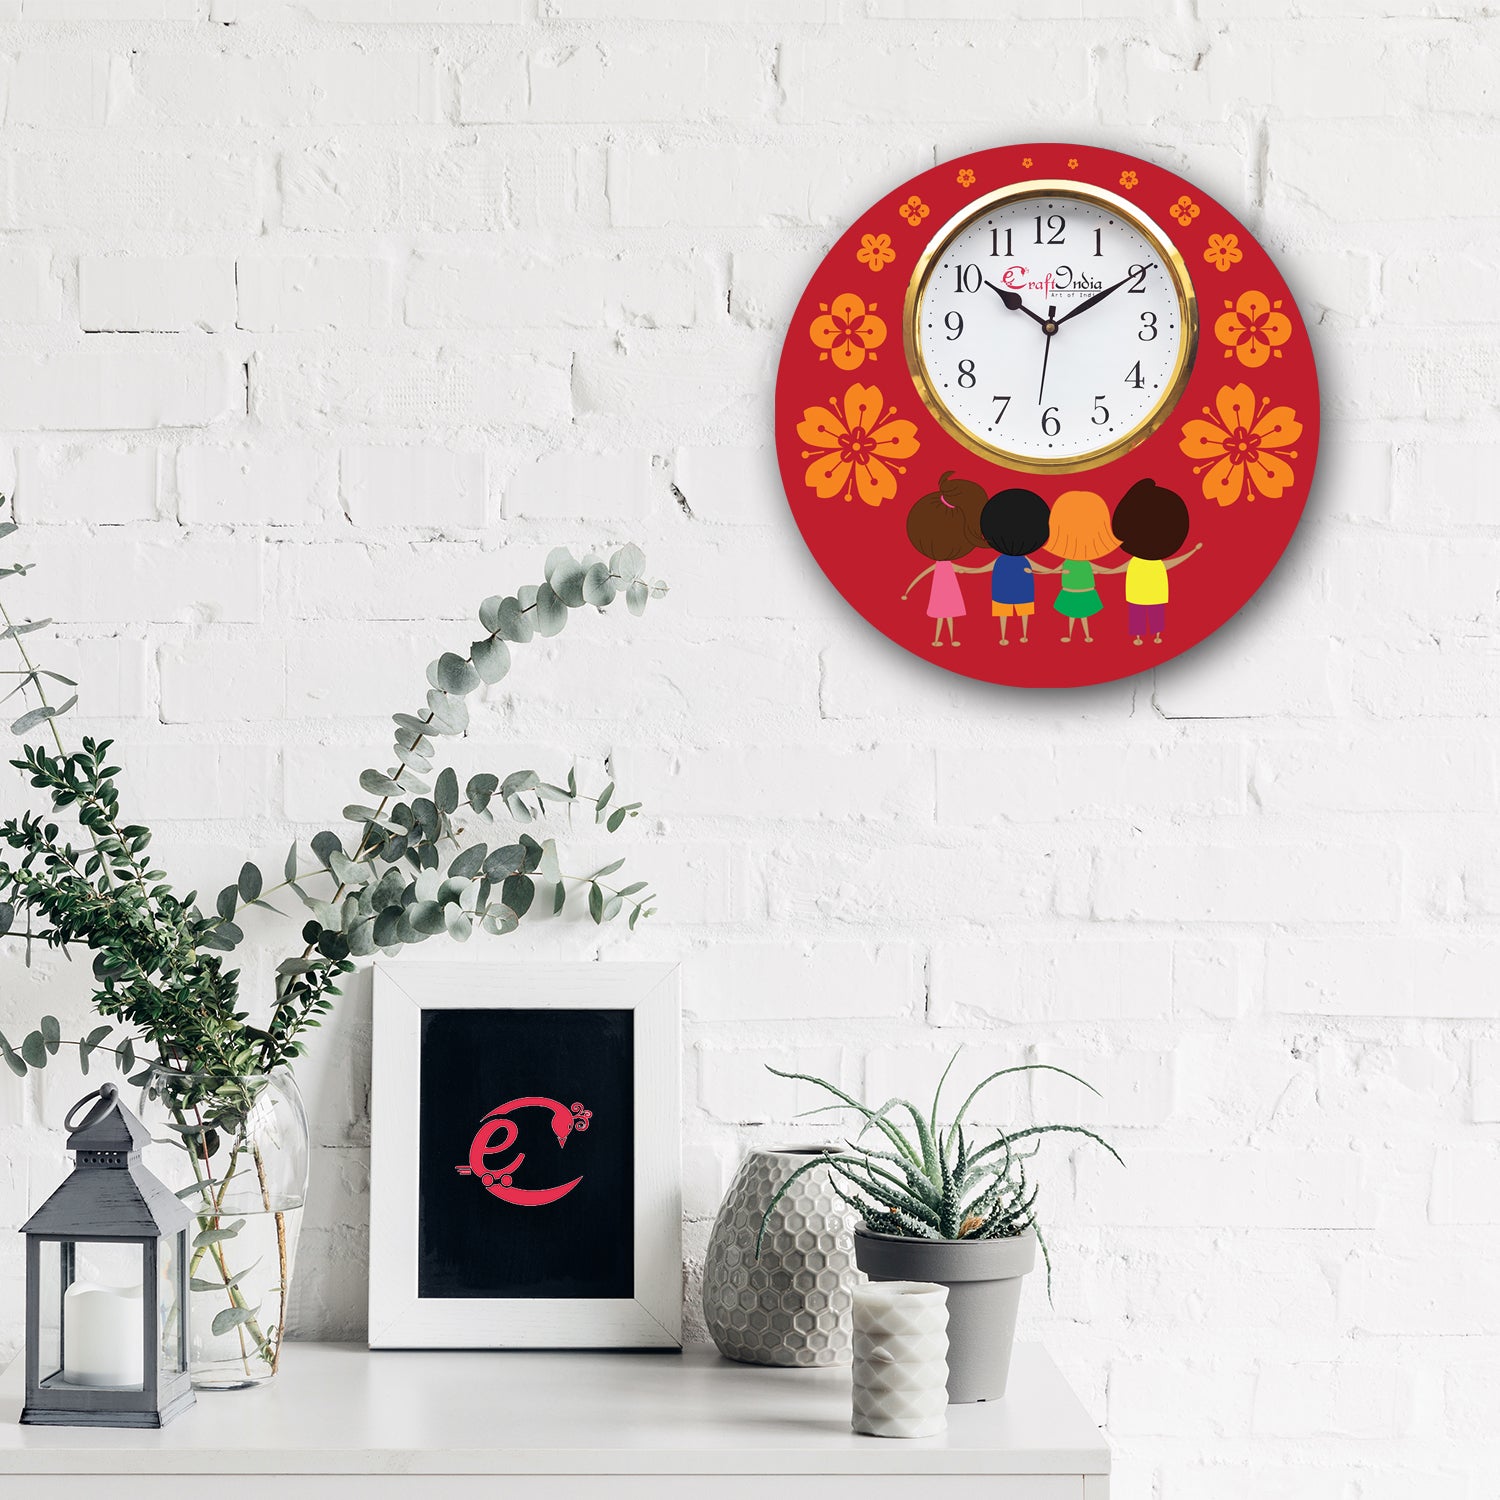 Friendship Theme Wooden Colorful Round Wall Clock 1